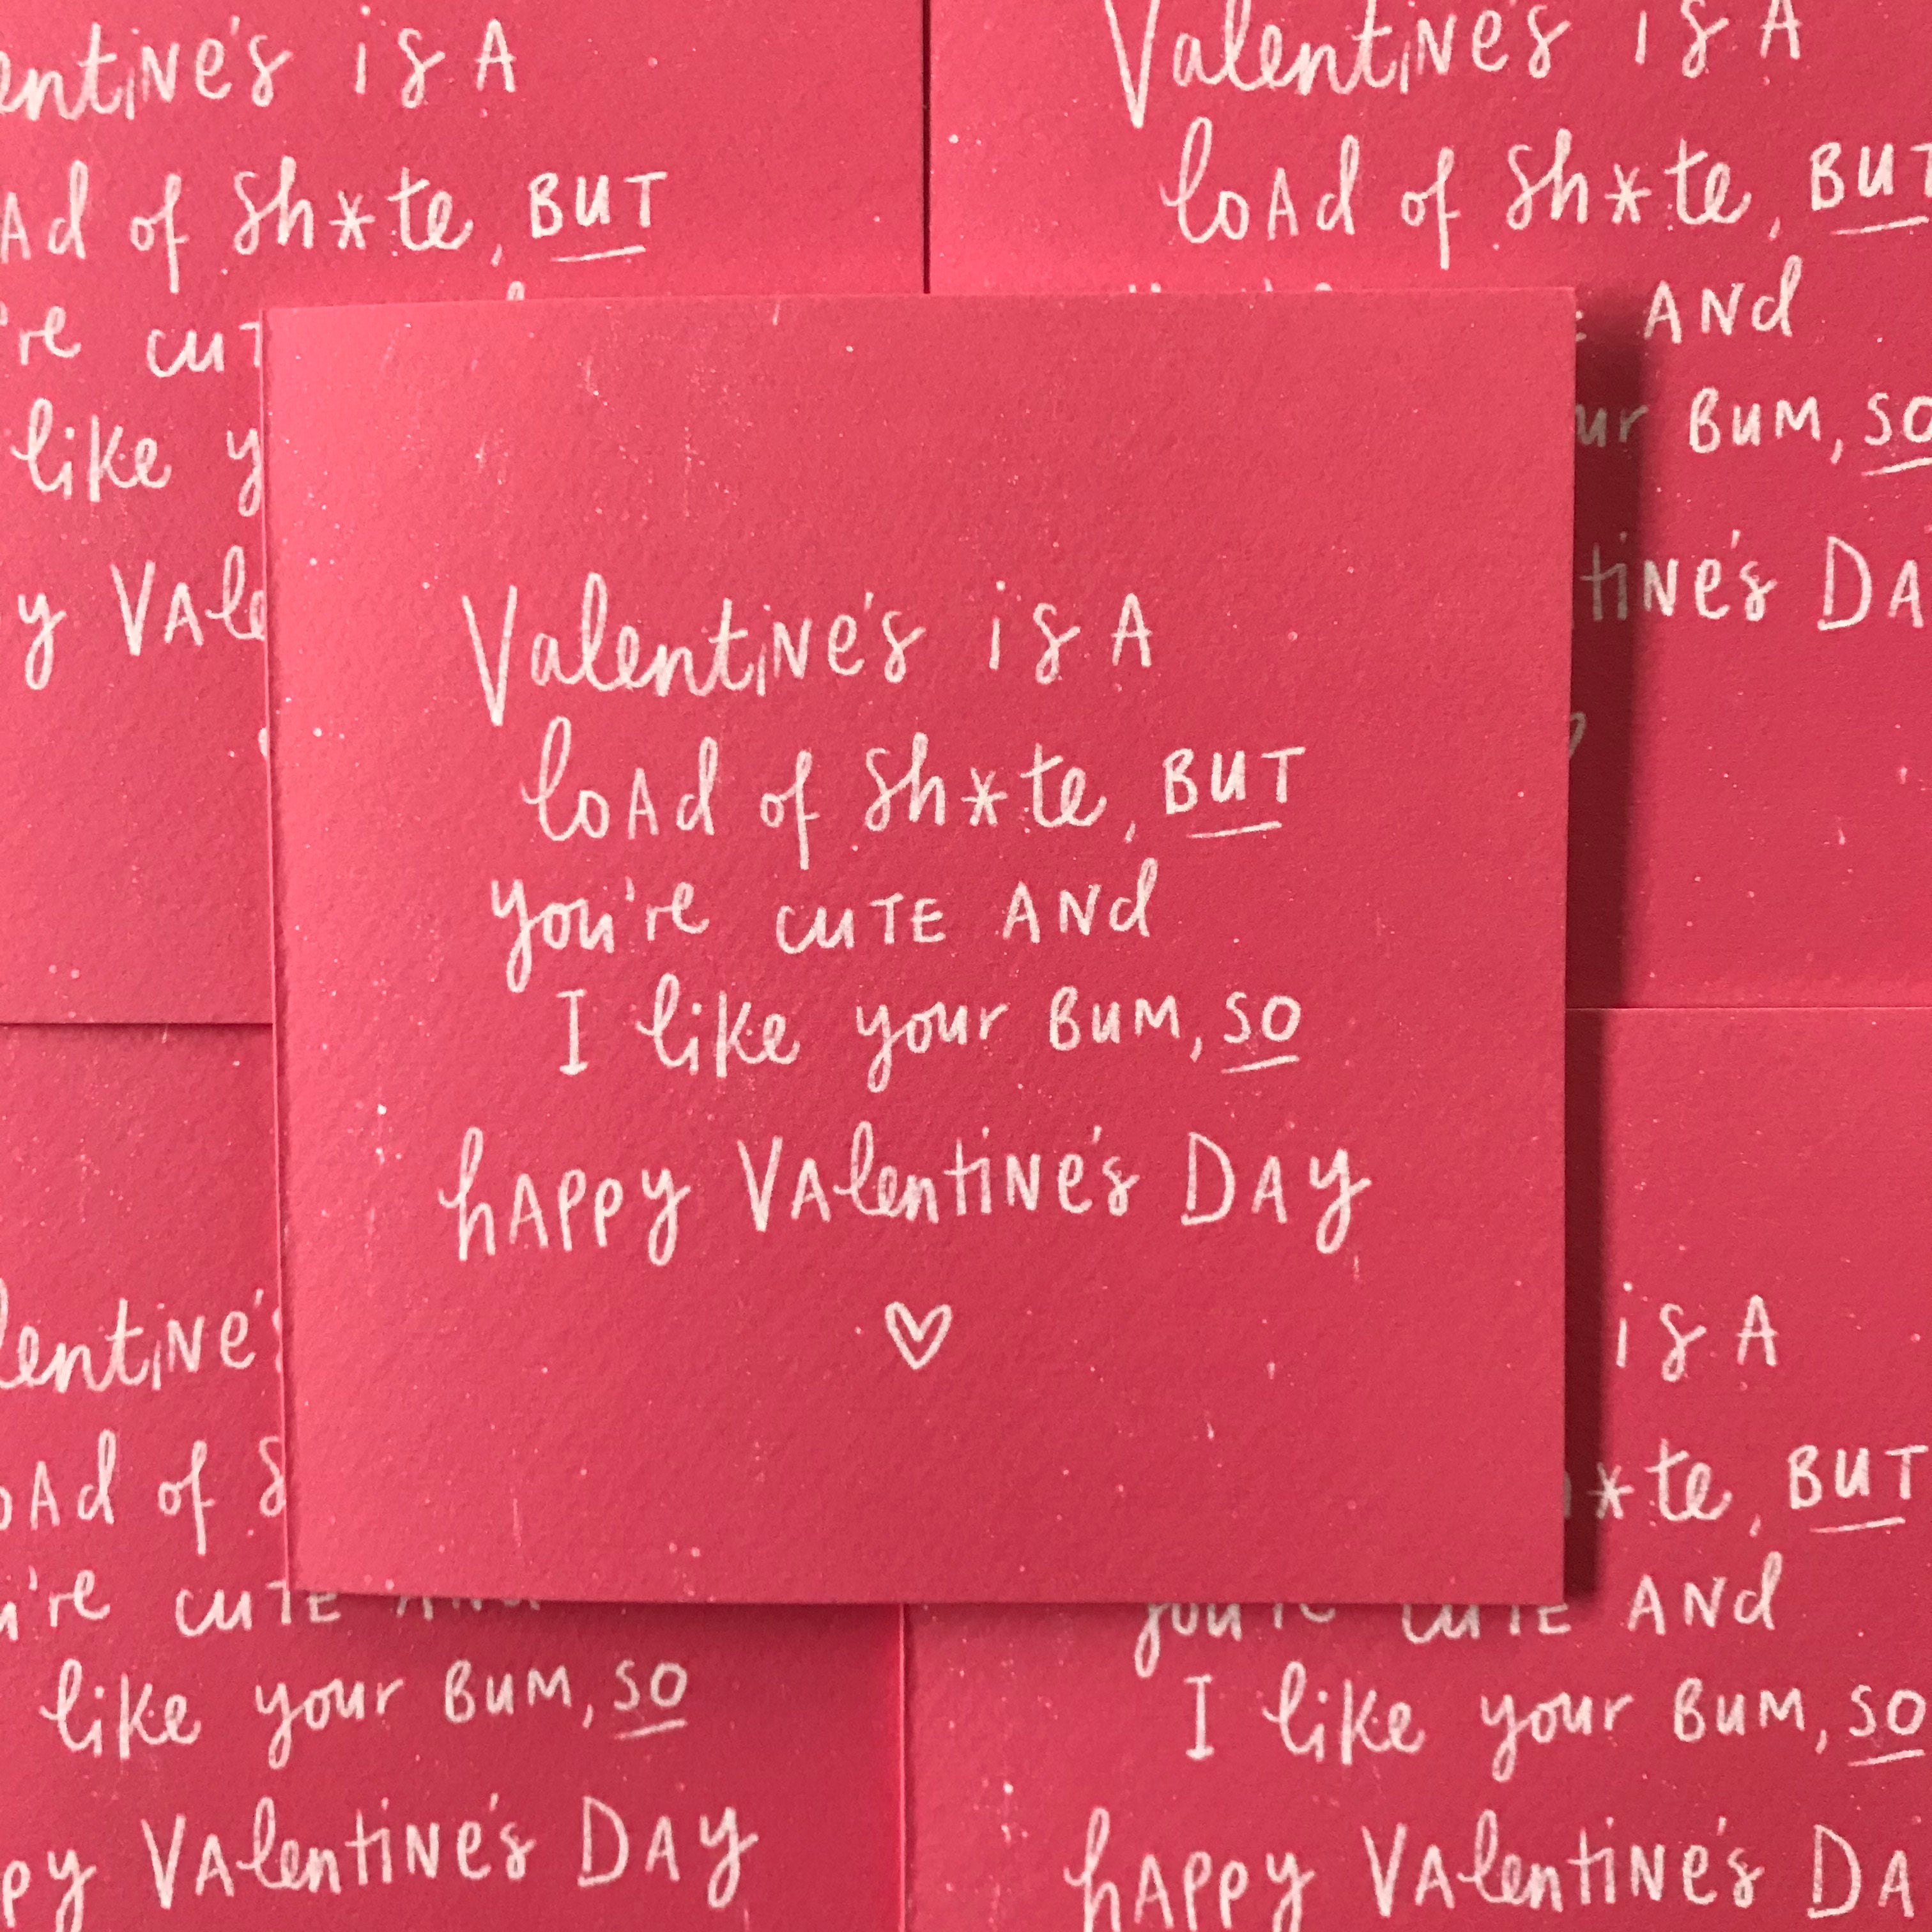 Valentine's is a load of Sh@*e